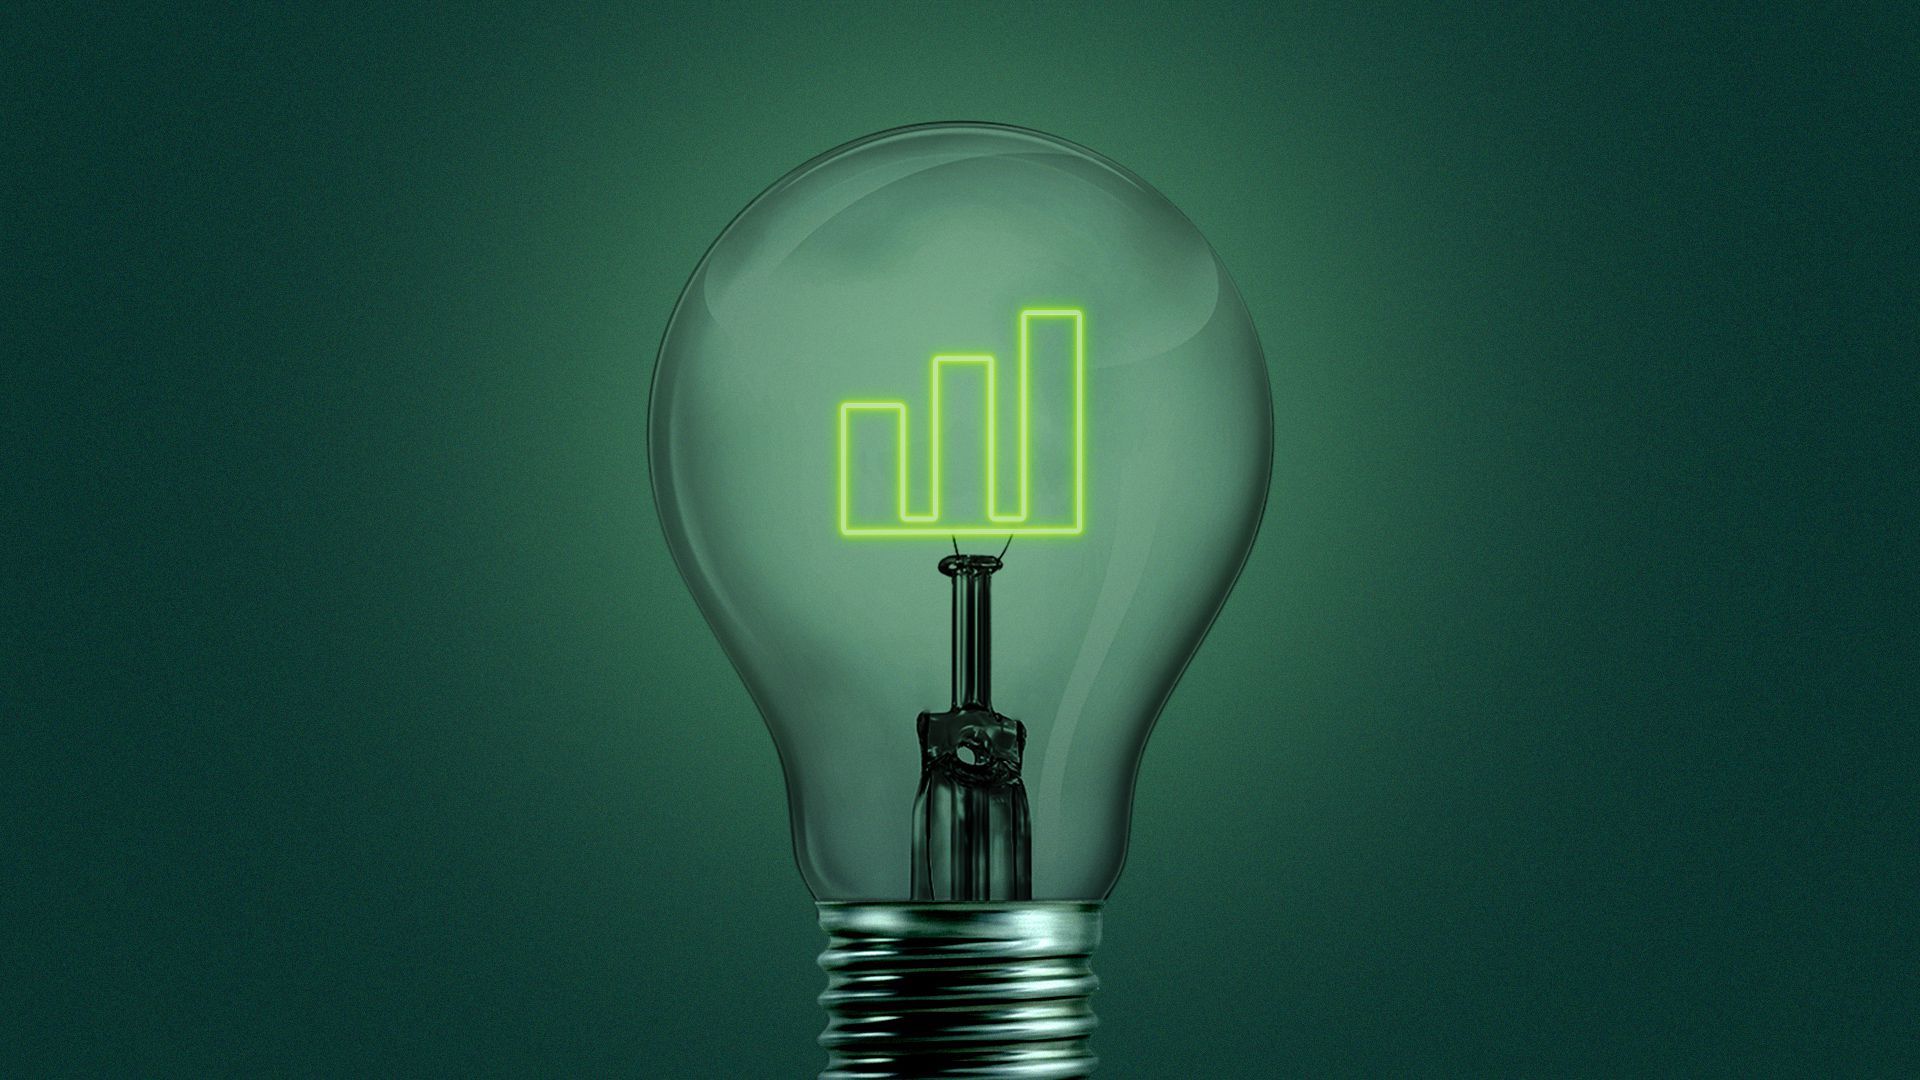 Illustration of a lightbulb with a glowing filament in the shape of a bar chart.